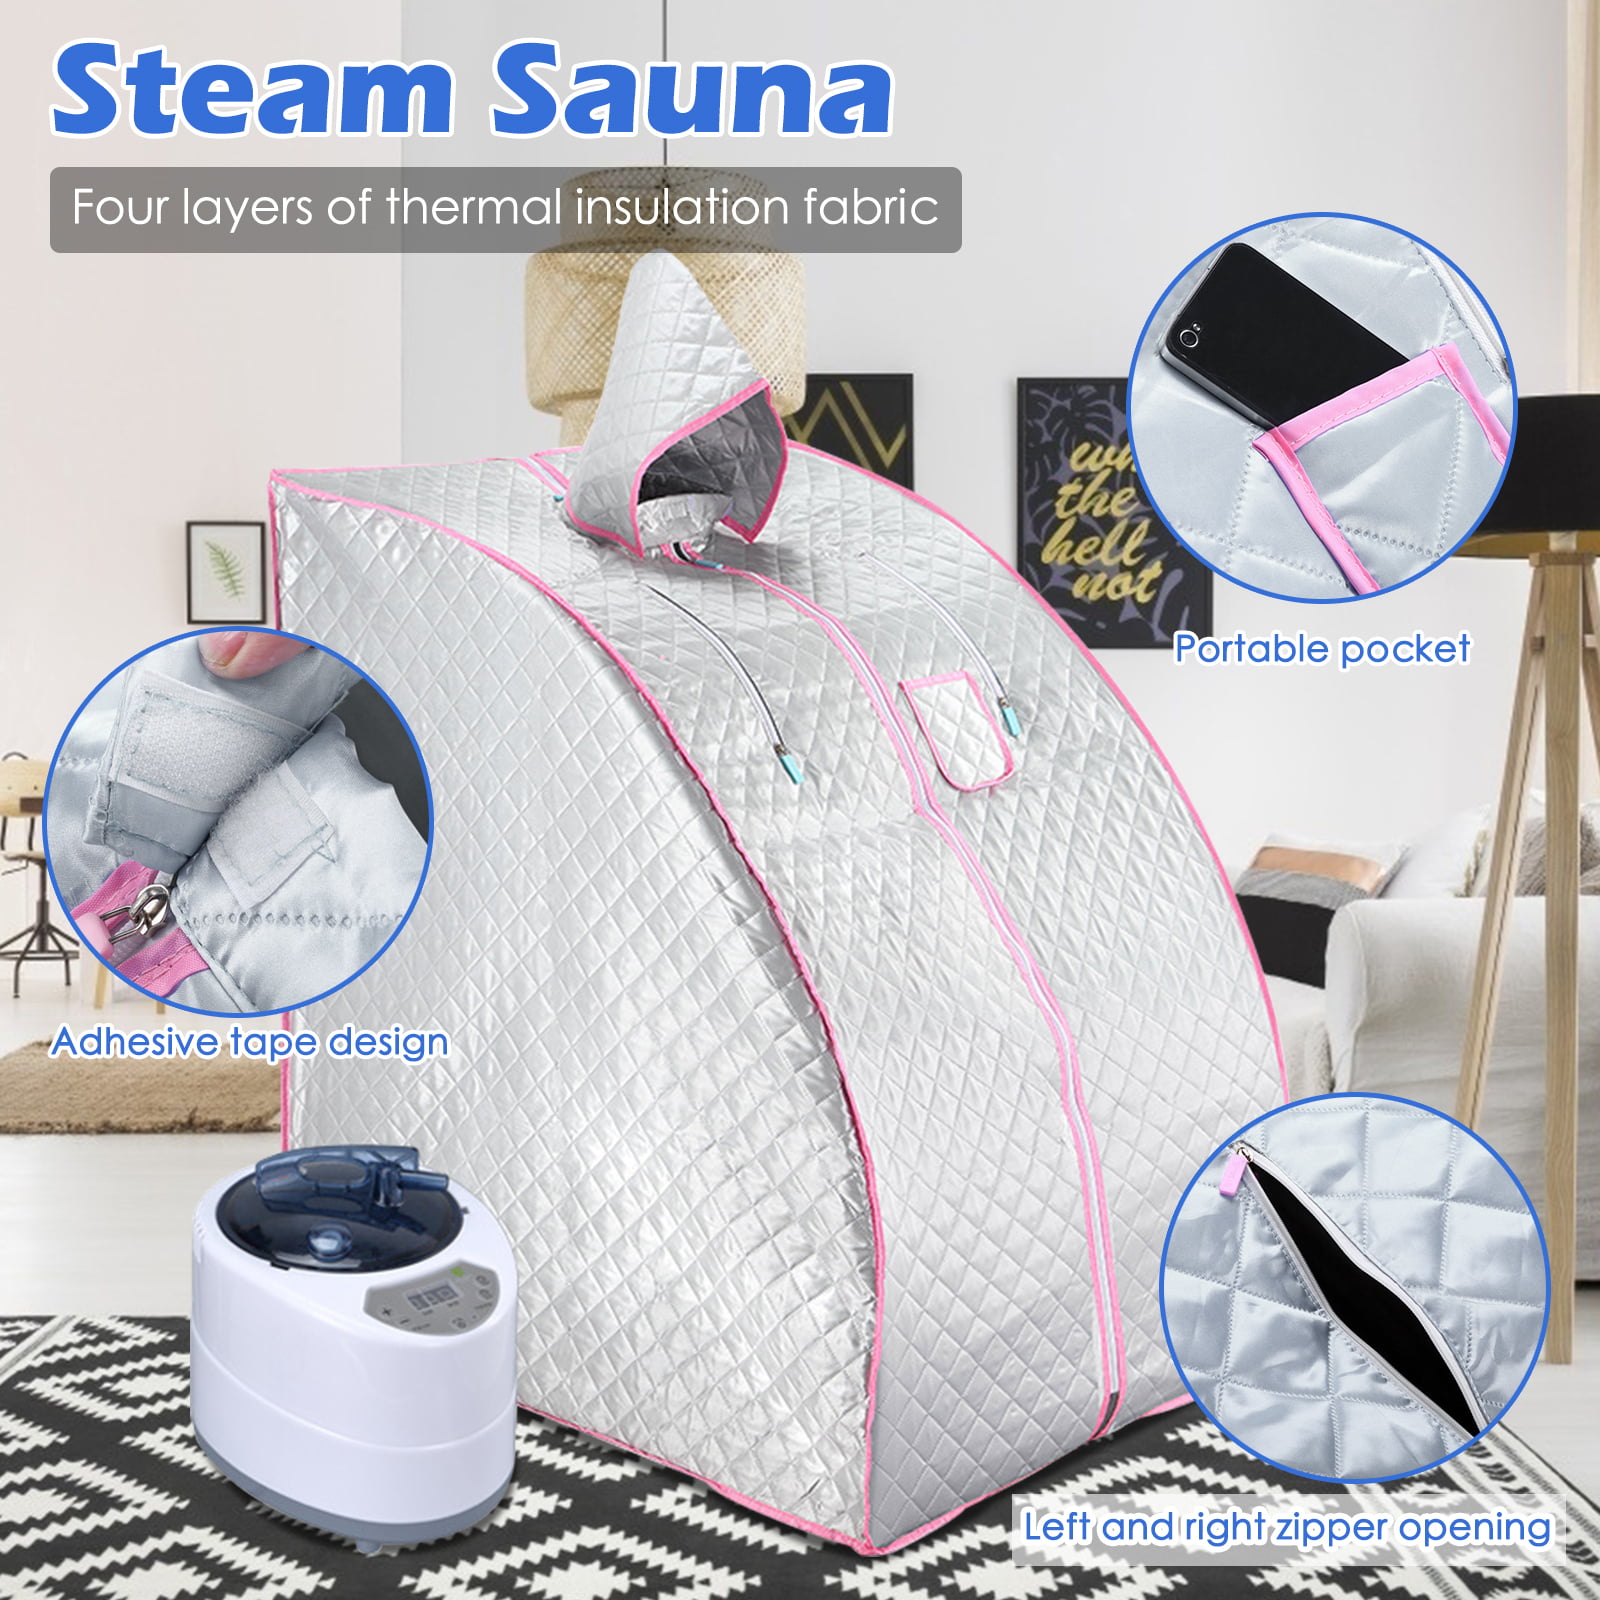 Details about   2L Portable Folding Steam Sauna SPA Loss Weight Detox Therapy Body slim b h 236 